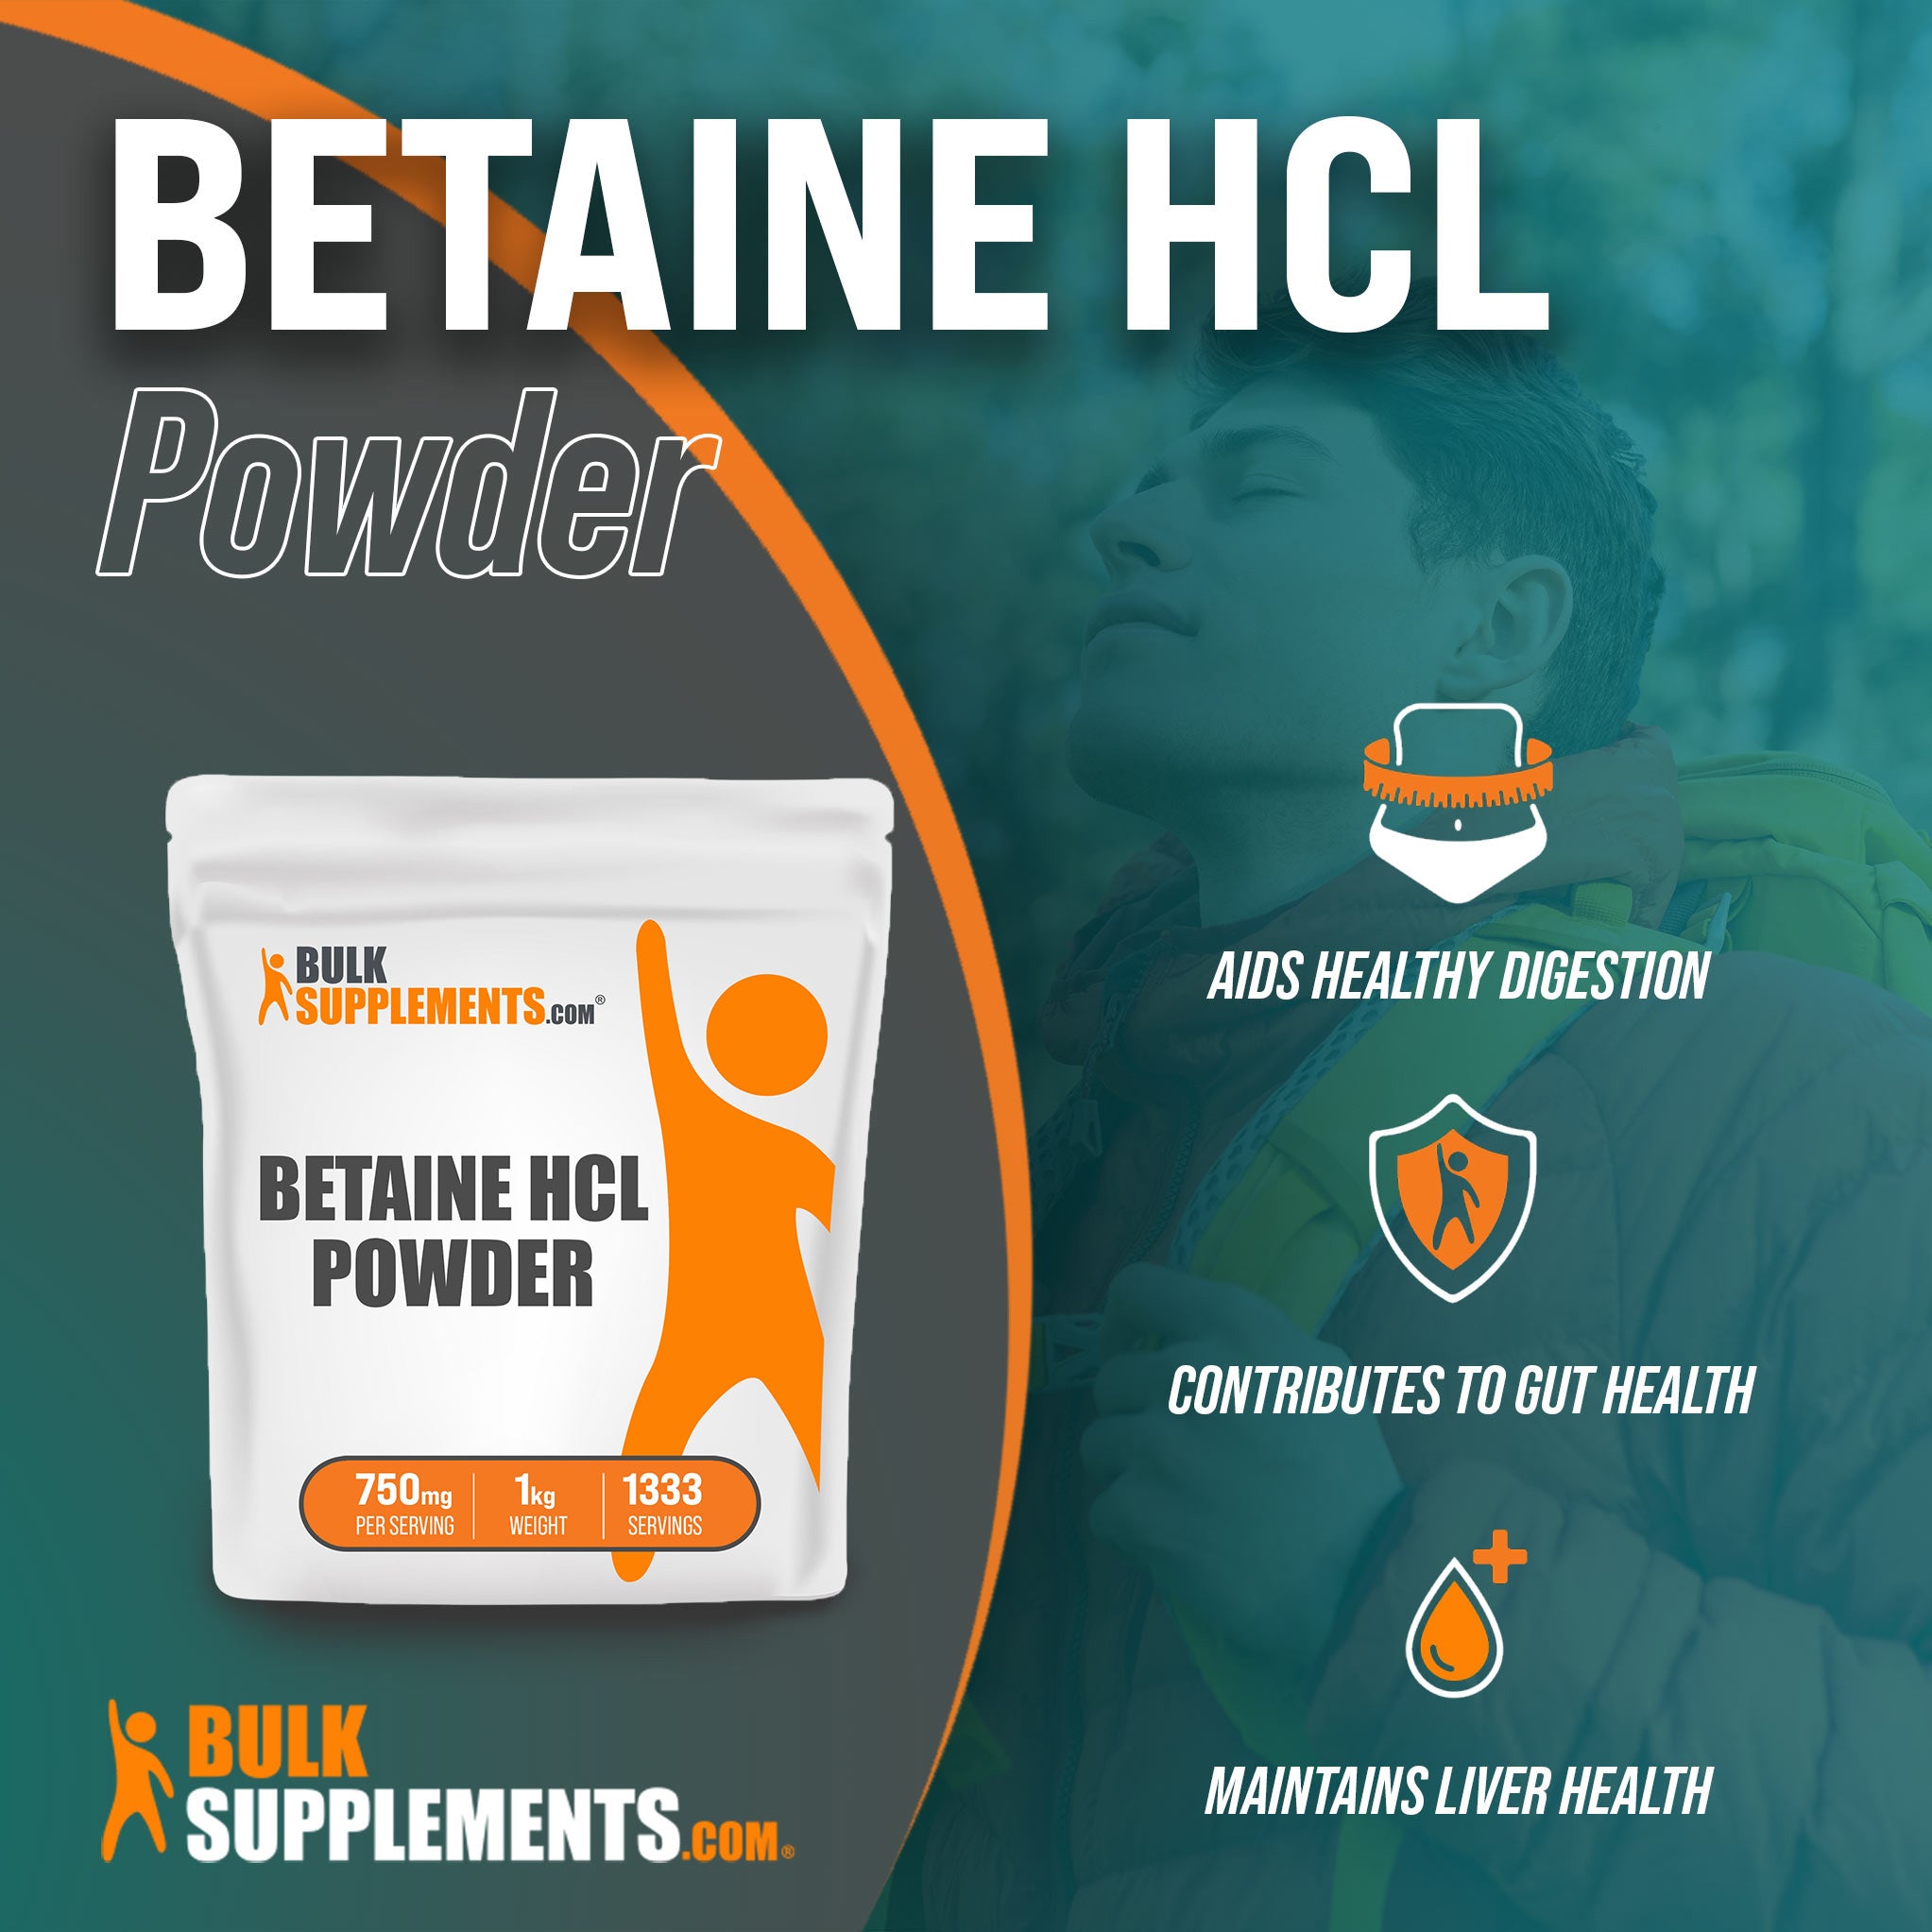 Betaine HCl 1kg contains digestive enzymes